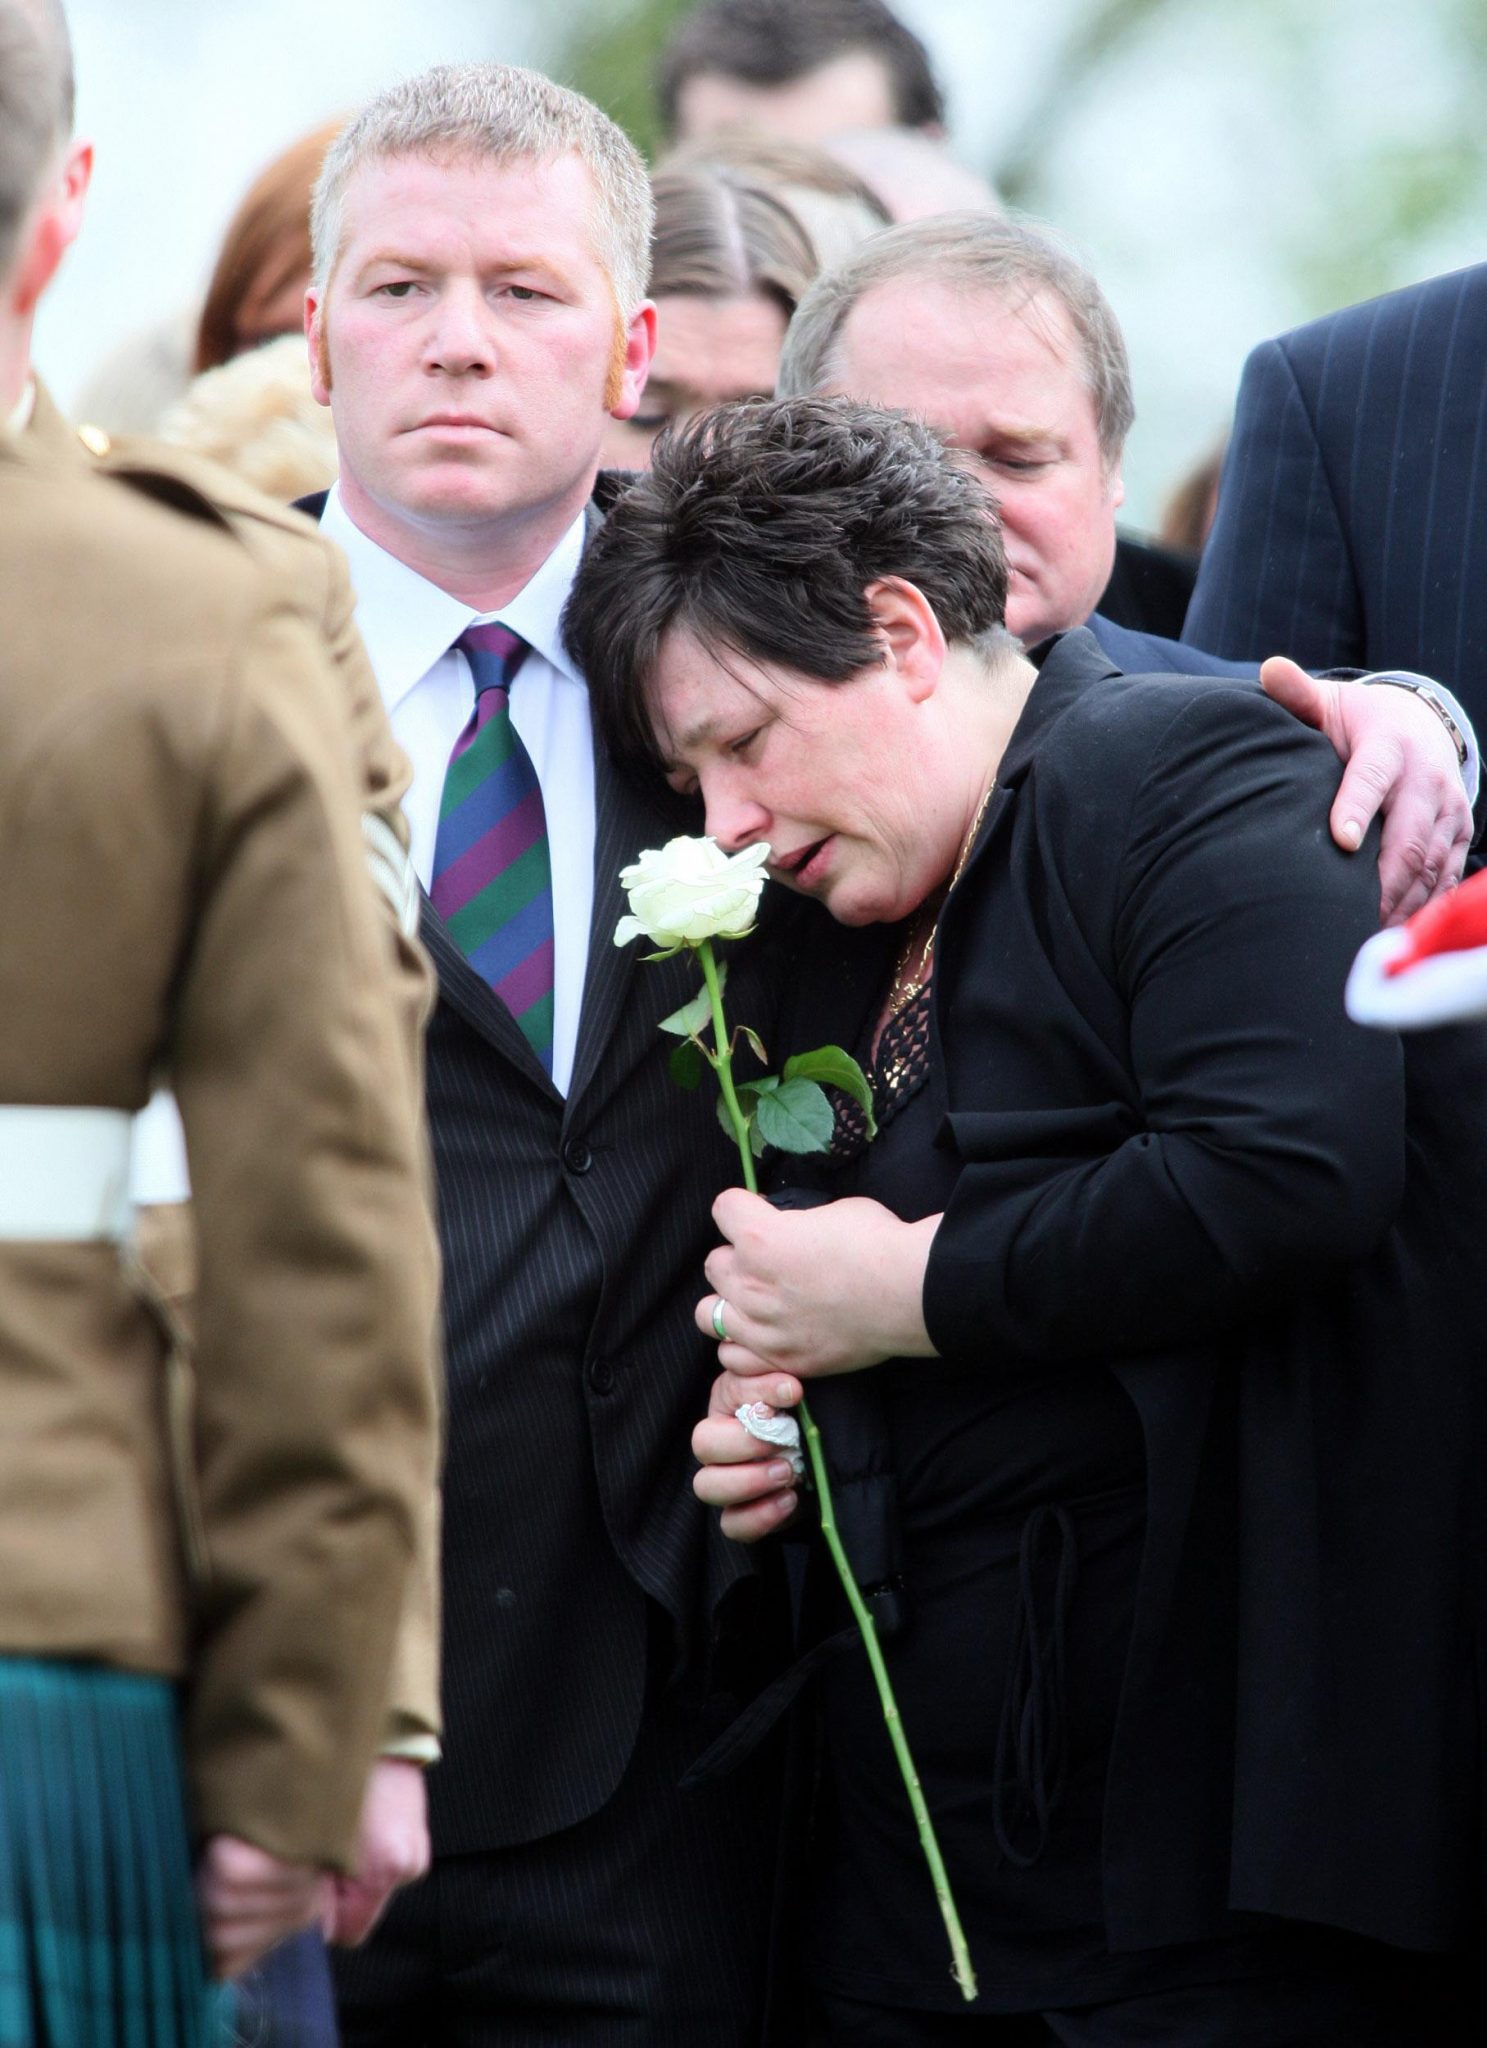 Allan and Janette Binnie during the burial of their son, Seán Binnie, at Roselawn Cemetery in Belfast, Northern Ireland in May 2009.